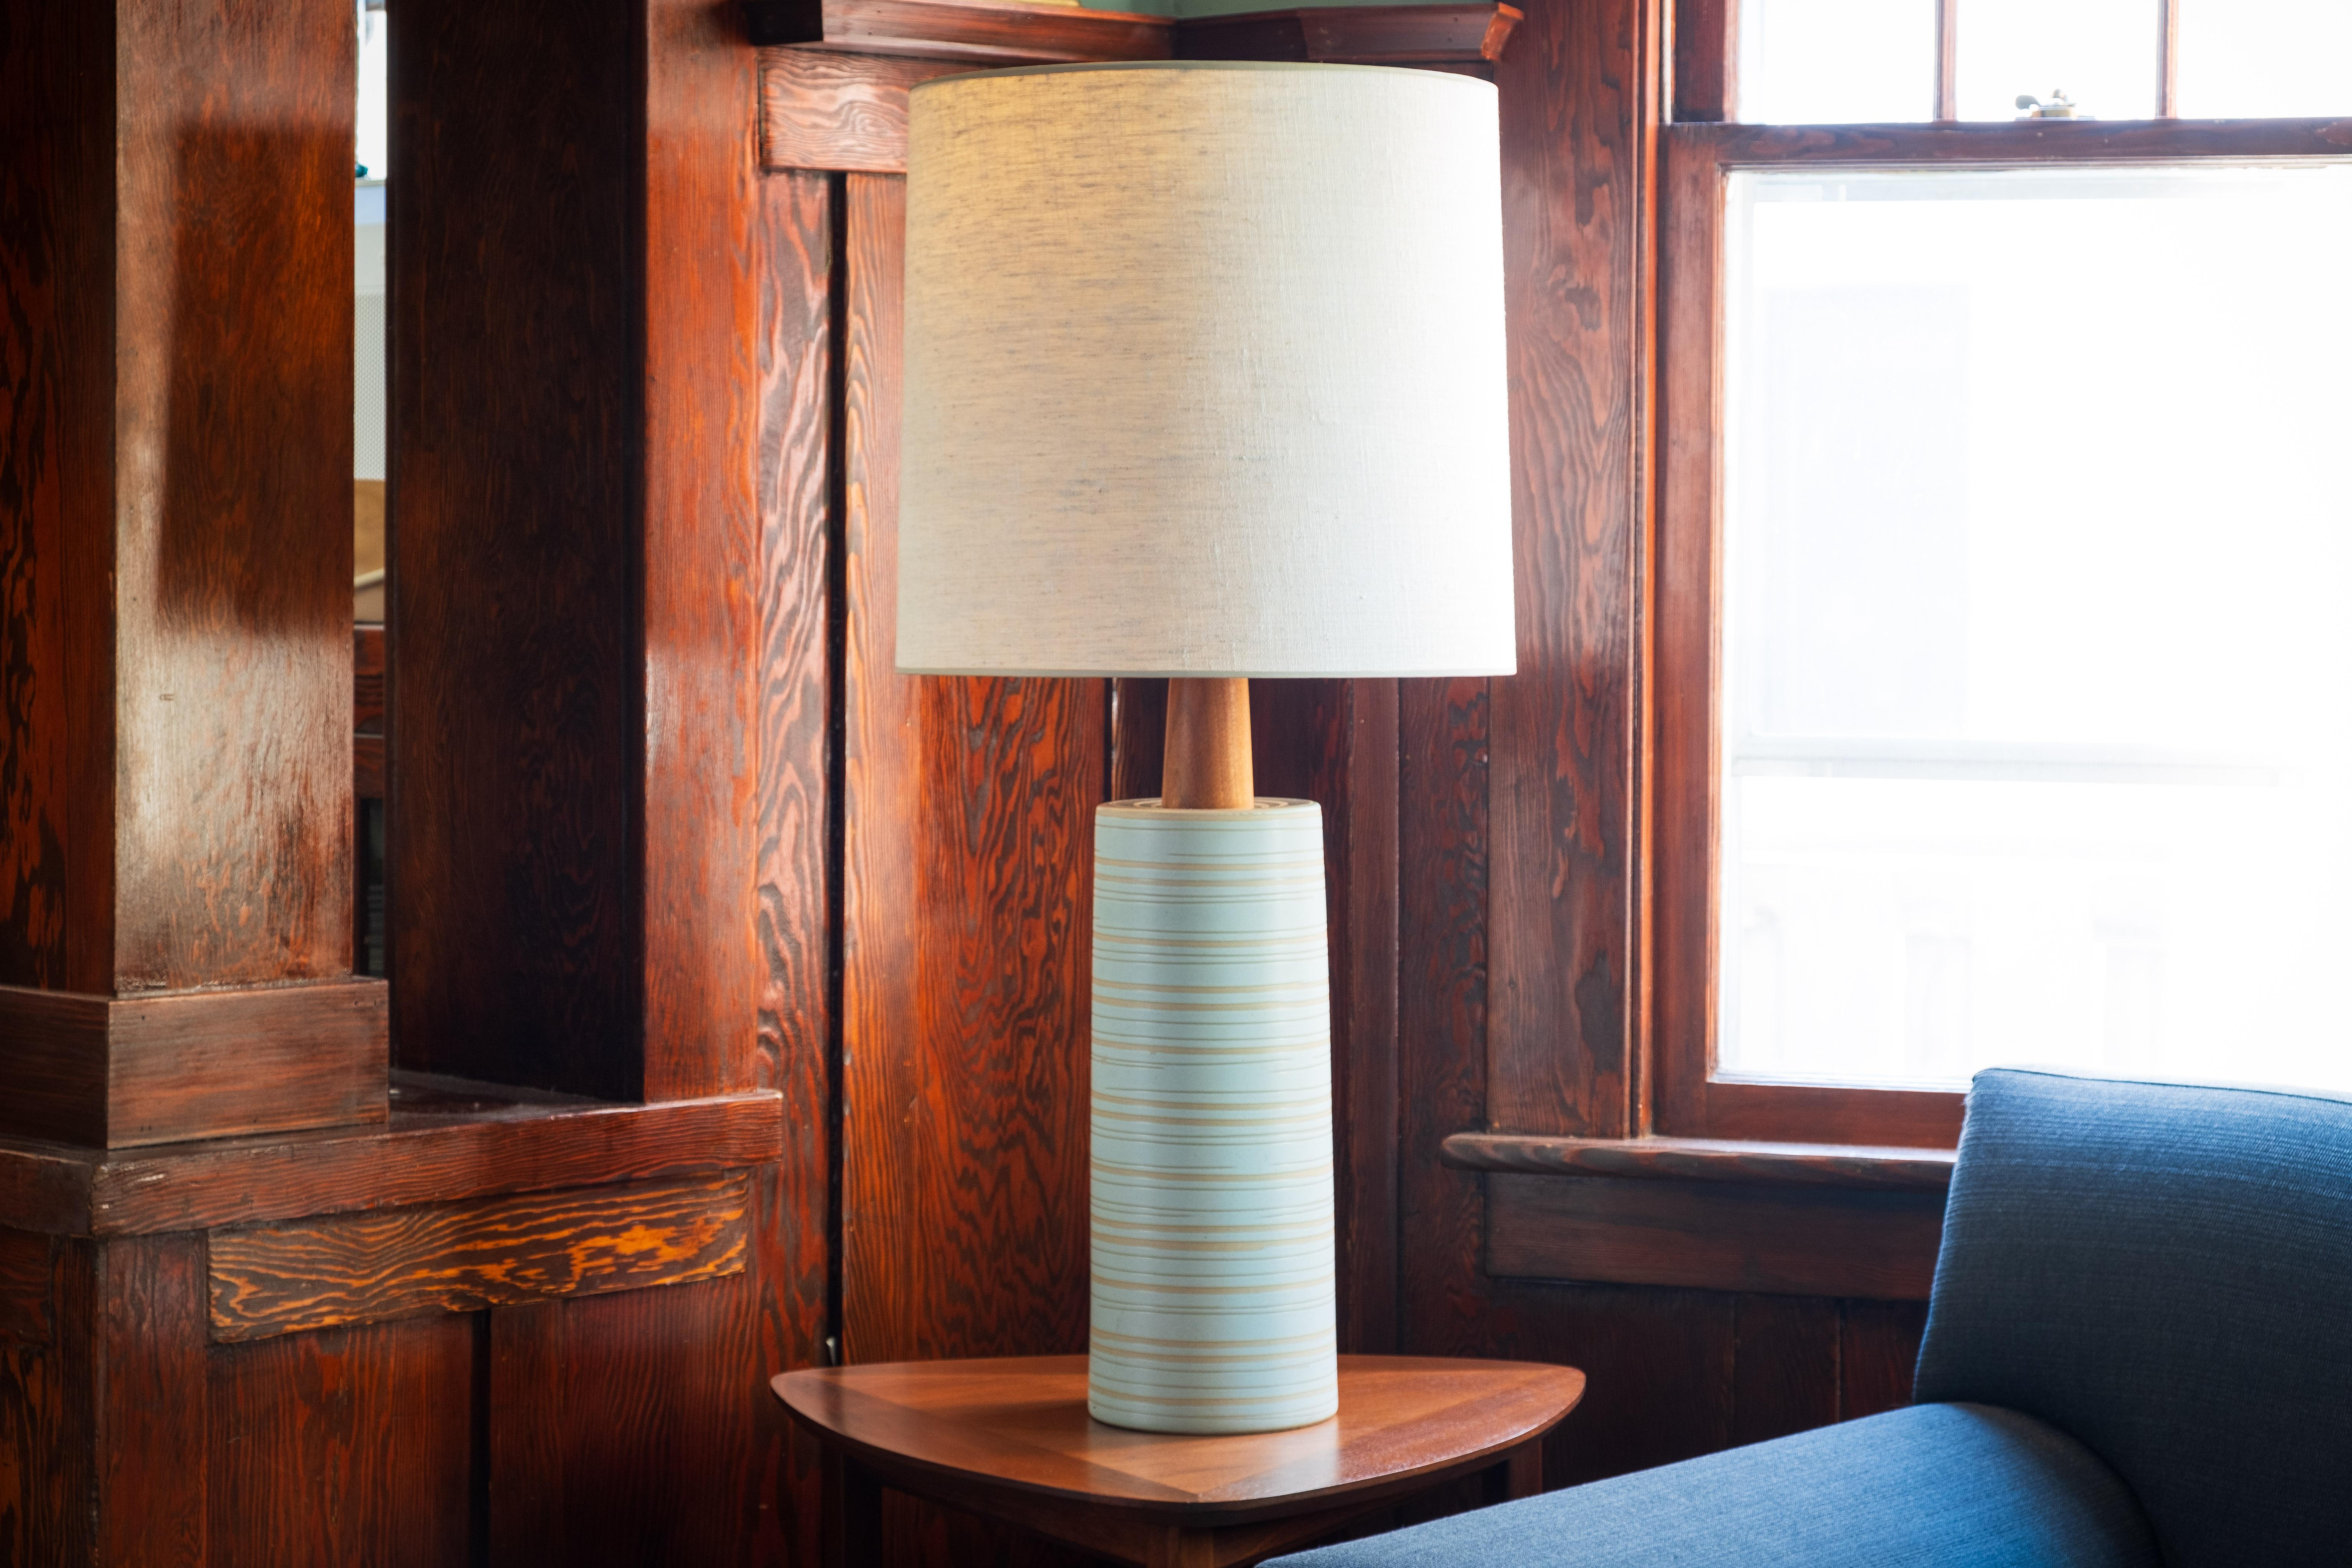 WHAT IS IT?
—
These signed Martz Model 223 lamps comes in a very light blue glaze. Just on the edge of looking white, the color is subtle but you'll notice it in the right light.

Thick and thin incised stripes circle the perimeter of the lamp from